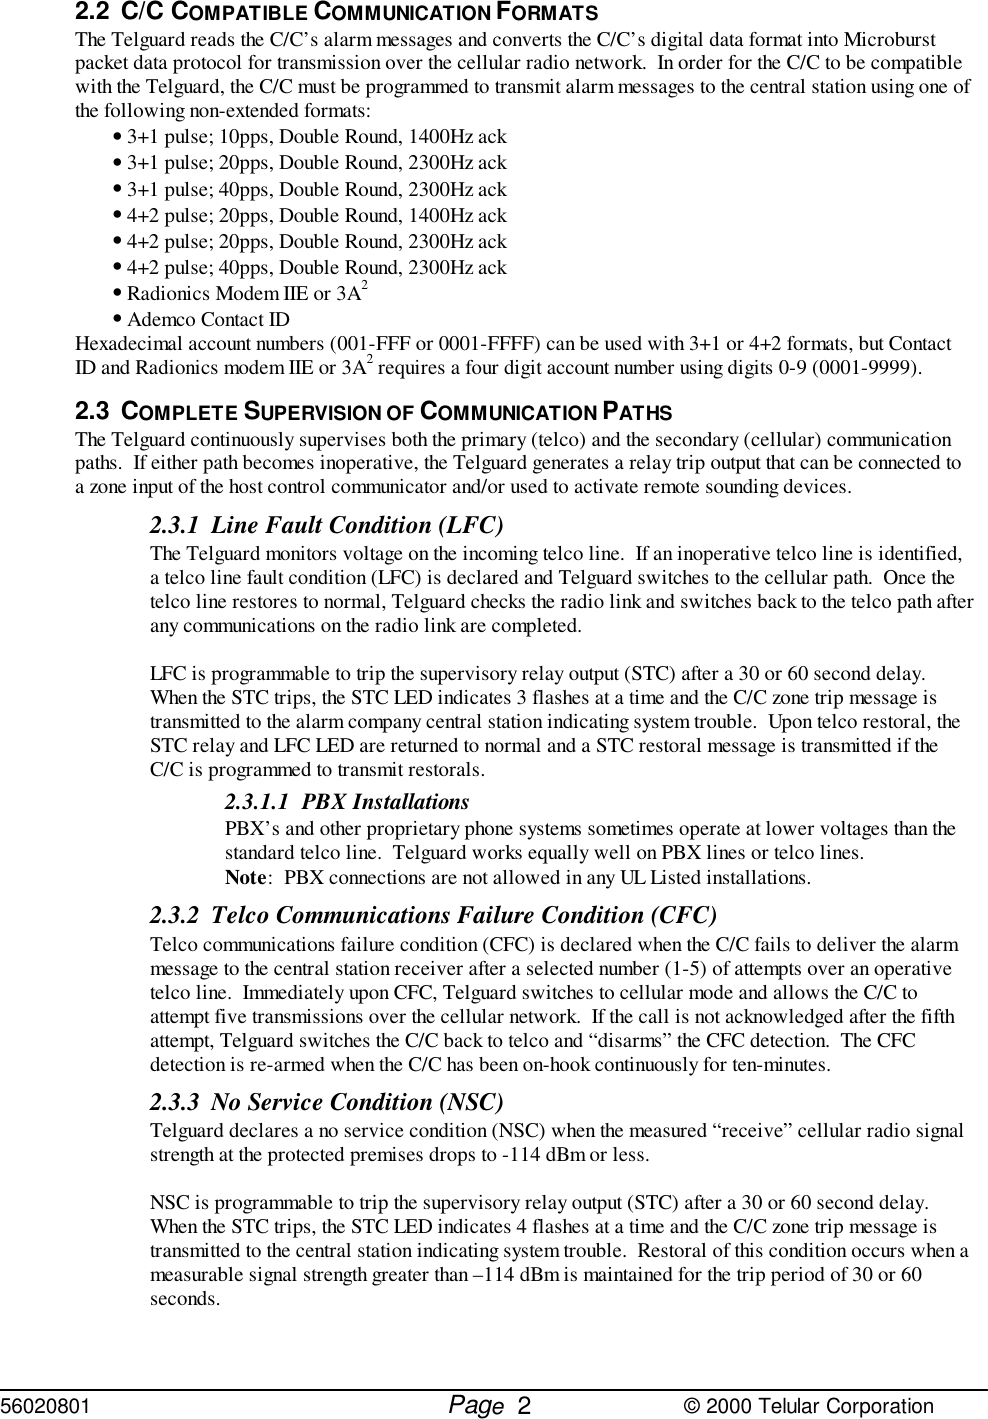 56020801         Page                             © 2000 Telular Corporation22.2 C/C COMPATIBLE COMMUNICATION FORMATSThe Telguard reads the C/C’s alarm messages and converts the C/C’s digital data format into Microburstpacket data protocol for transmission over the cellular radio network.  In order for the C/C to be compatiblewith the Telguard, the C/C must be programmed to transmit alarm messages to the central station using one ofthe following non-extended formats:• 3+1 pulse; 10pps, Double Round, 1400Hz ack• 3+1 pulse; 20pps, Double Round, 2300Hz ack • 3+1 pulse; 40pps, Double Round, 2300Hz ack• 4+2 pulse; 20pps, Double Round, 1400Hz ack• 4+2 pulse; 20pps, Double Round, 2300Hz ack• 4+2 pulse; 40pps, Double Round, 2300Hz ack• Radionics Modem IIE or 3A2• Ademco Contact IDHexadecimal account numbers (001-FFF or 0001-FFFF) can be used with 3+1 or 4+2 formats, but ContactID and Radionics modem IIE or 3A2 requires a four digit account number using digits 0-9 (0001-9999).2.3 COMPLETE SUPERVISION OF COMMUNICATION PATHSThe Telguard continuously supervises both the primary (telco) and the secondary (cellular) communicationpaths.  If either path becomes inoperative, the Telguard generates a relay trip output that can be connected toa zone input of the host control communicator and/or used to activate remote sounding devices.  2.3.1 Line Fault Condition (LFC)The Telguard monitors voltage on the incoming telco line.  If an inoperative telco line is identified,a telco line fault condition (LFC) is declared and Telguard switches to the cellular path.  Once thetelco line restores to normal, Telguard checks the radio link and switches back to the telco path afterany communications on the radio link are completed.   LFC is programmable to trip the supervisory relay output (STC) after a 30 or 60 second delay. When the STC trips, the STC LED indicates 3 flashes at a time and the C/C zone trip message istransmitted to the alarm company central station indicating system trouble.  Upon telco restoral, theSTC relay and LFC LED are returned to normal and a STC restoral message is transmitted if theC/C is programmed to transmit restorals.2.3.1.1 PBX InstallationsPBX’s and other proprietary phone systems sometimes operate at lower voltages than thestandard telco line.  Telguard works equally well on PBX lines or telco lines. Note:  PBX connections are not allowed in any UL Listed installations.2.3.2 Telco Communications Failure Condition (CFC)Telco communications failure condition (CFC) is declared when the C/C fails to deliver the alarmmessage to the central station receiver after a selected number (1-5) of attempts over an operativetelco line.  Immediately upon CFC, Telguard switches to cellular mode and allows the C/C toattempt five transmissions over the cellular network.  If the call is not acknowledged after the fifthattempt, Telguard switches the C/C back to telco and “disarms” the CFC detection.  The CFCdetection is re-armed when the C/C has been on-hook continuously for ten-minutes.2.3.3 No Service Condition (NSC)Telguard declares a no service condition (NSC) when the measured “receive” cellular radio signalstrength at the protected premises drops to -114 dBm or less.  NSC is programmable to trip the supervisory relay output (STC) after a 30 or 60 second delay. When the STC trips, the STC LED indicates 4 flashes at a time and the C/C zone trip message istransmitted to the central station indicating system trouble.  Restoral of this condition occurs when ameasurable signal strength greater than –114 dBm is maintained for the trip period of 30 or 60seconds.